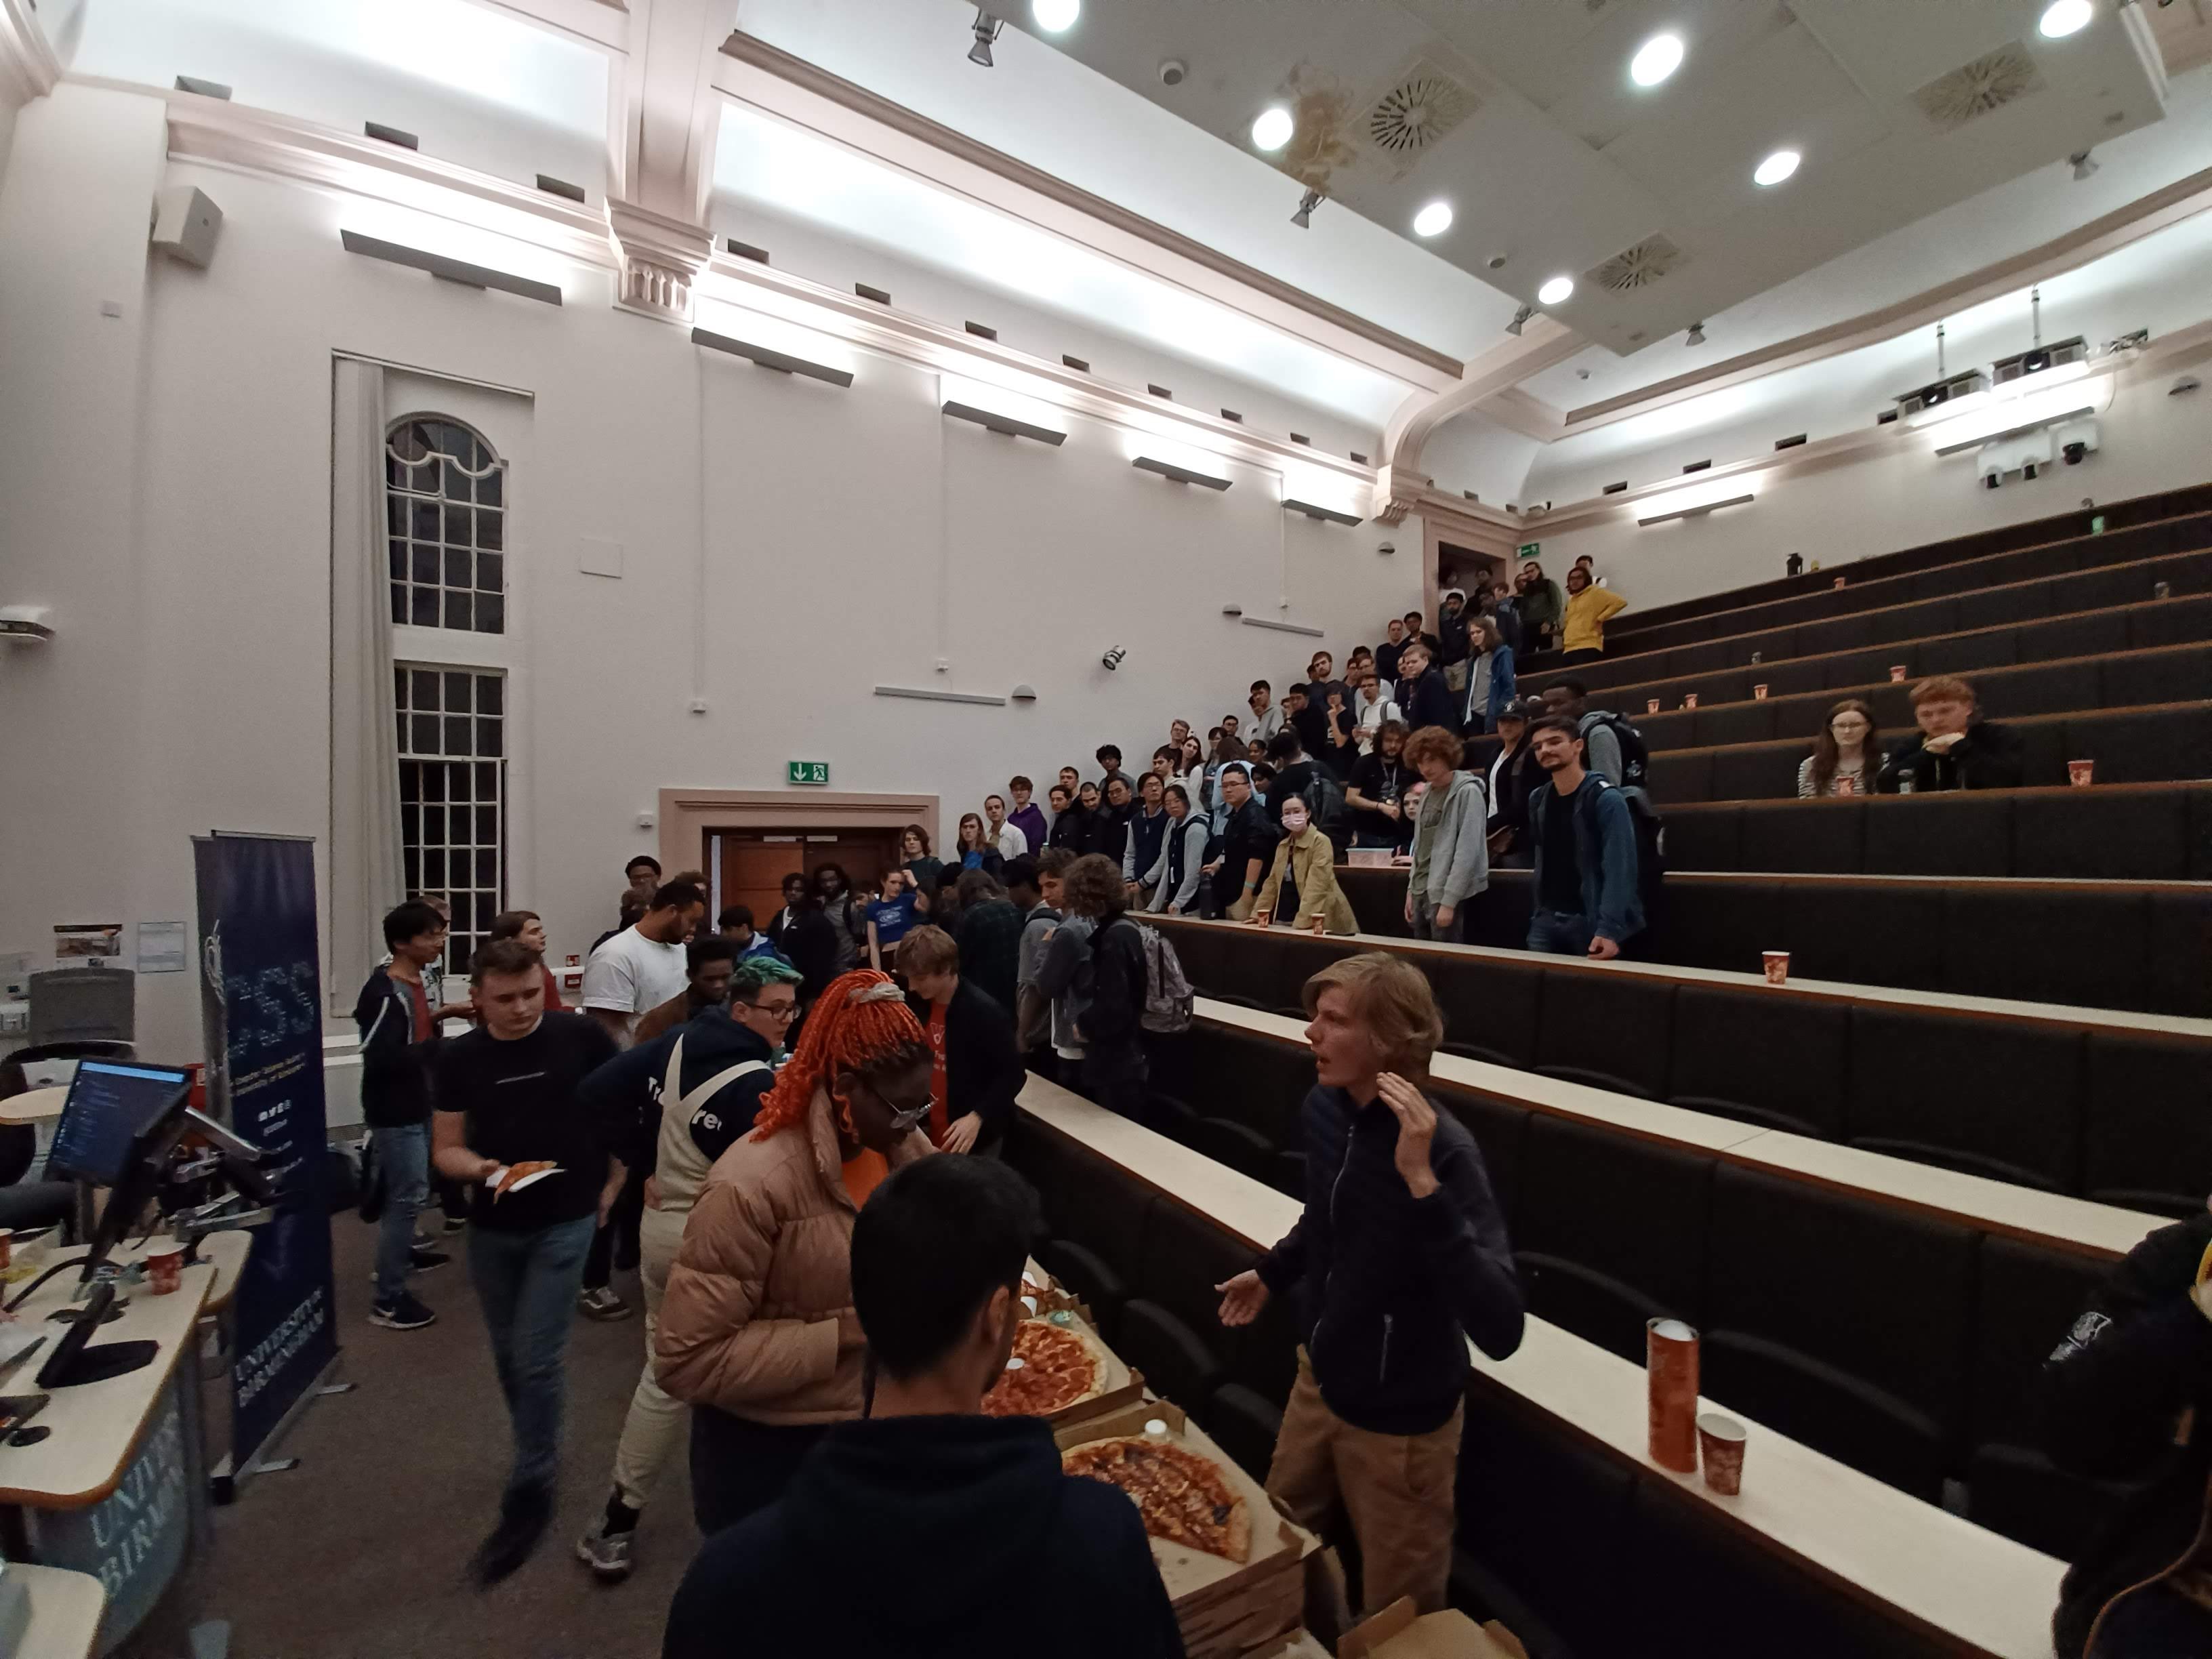 A photo from the CS Societies Night, with everyone lining up to get pizza.